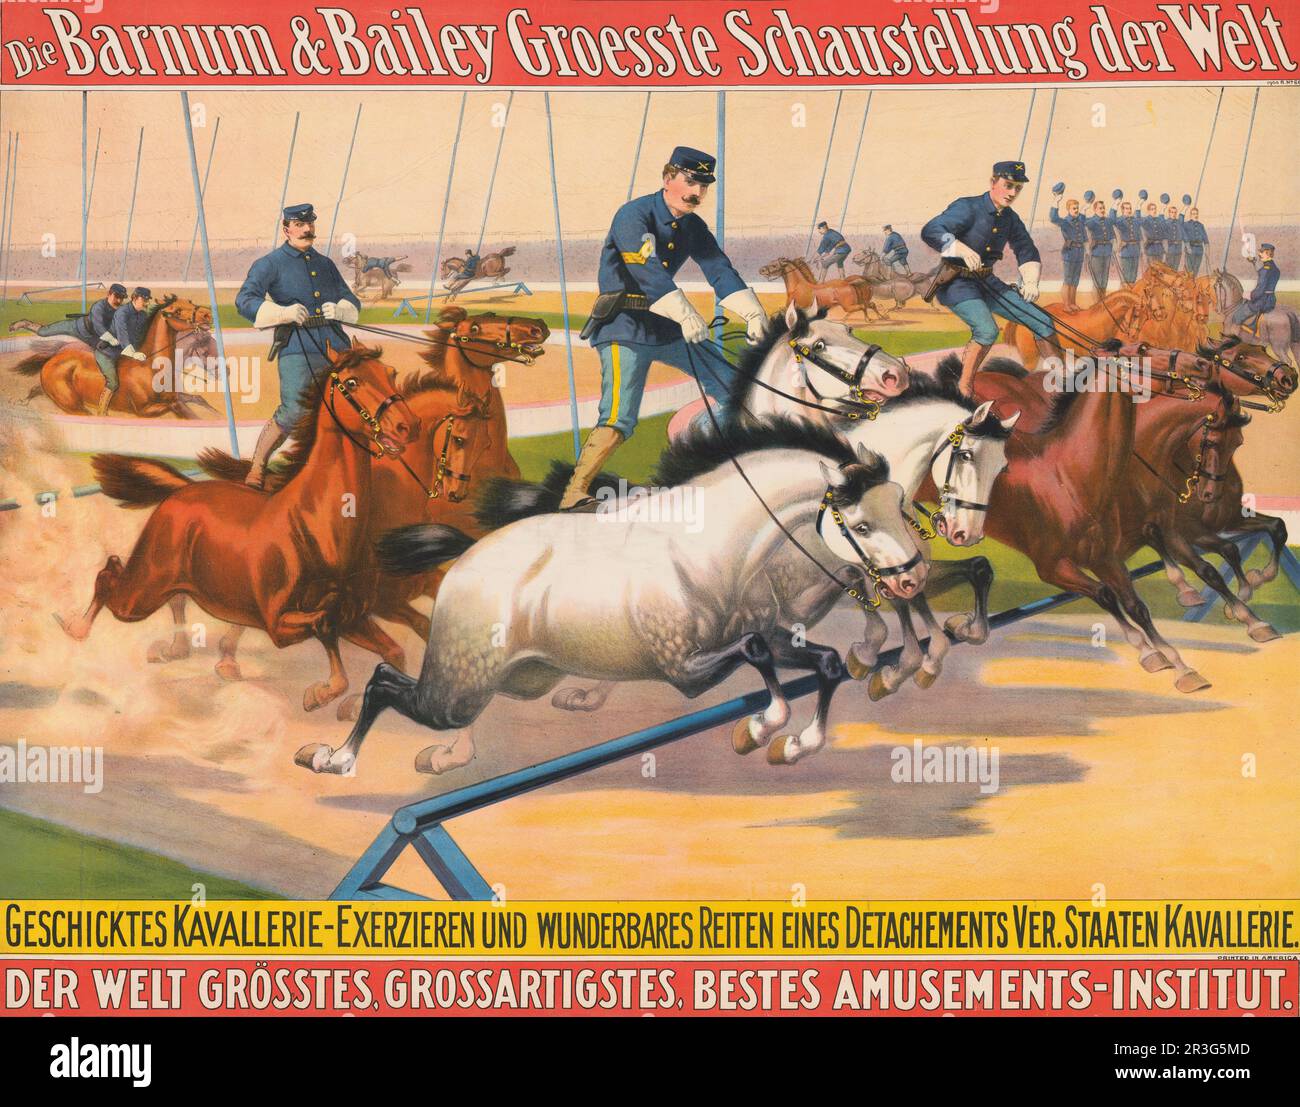 Vintage German Barnum & Bailey circus poster of men in military uniforms racing horses around a track, circa 1900. Stock Photo